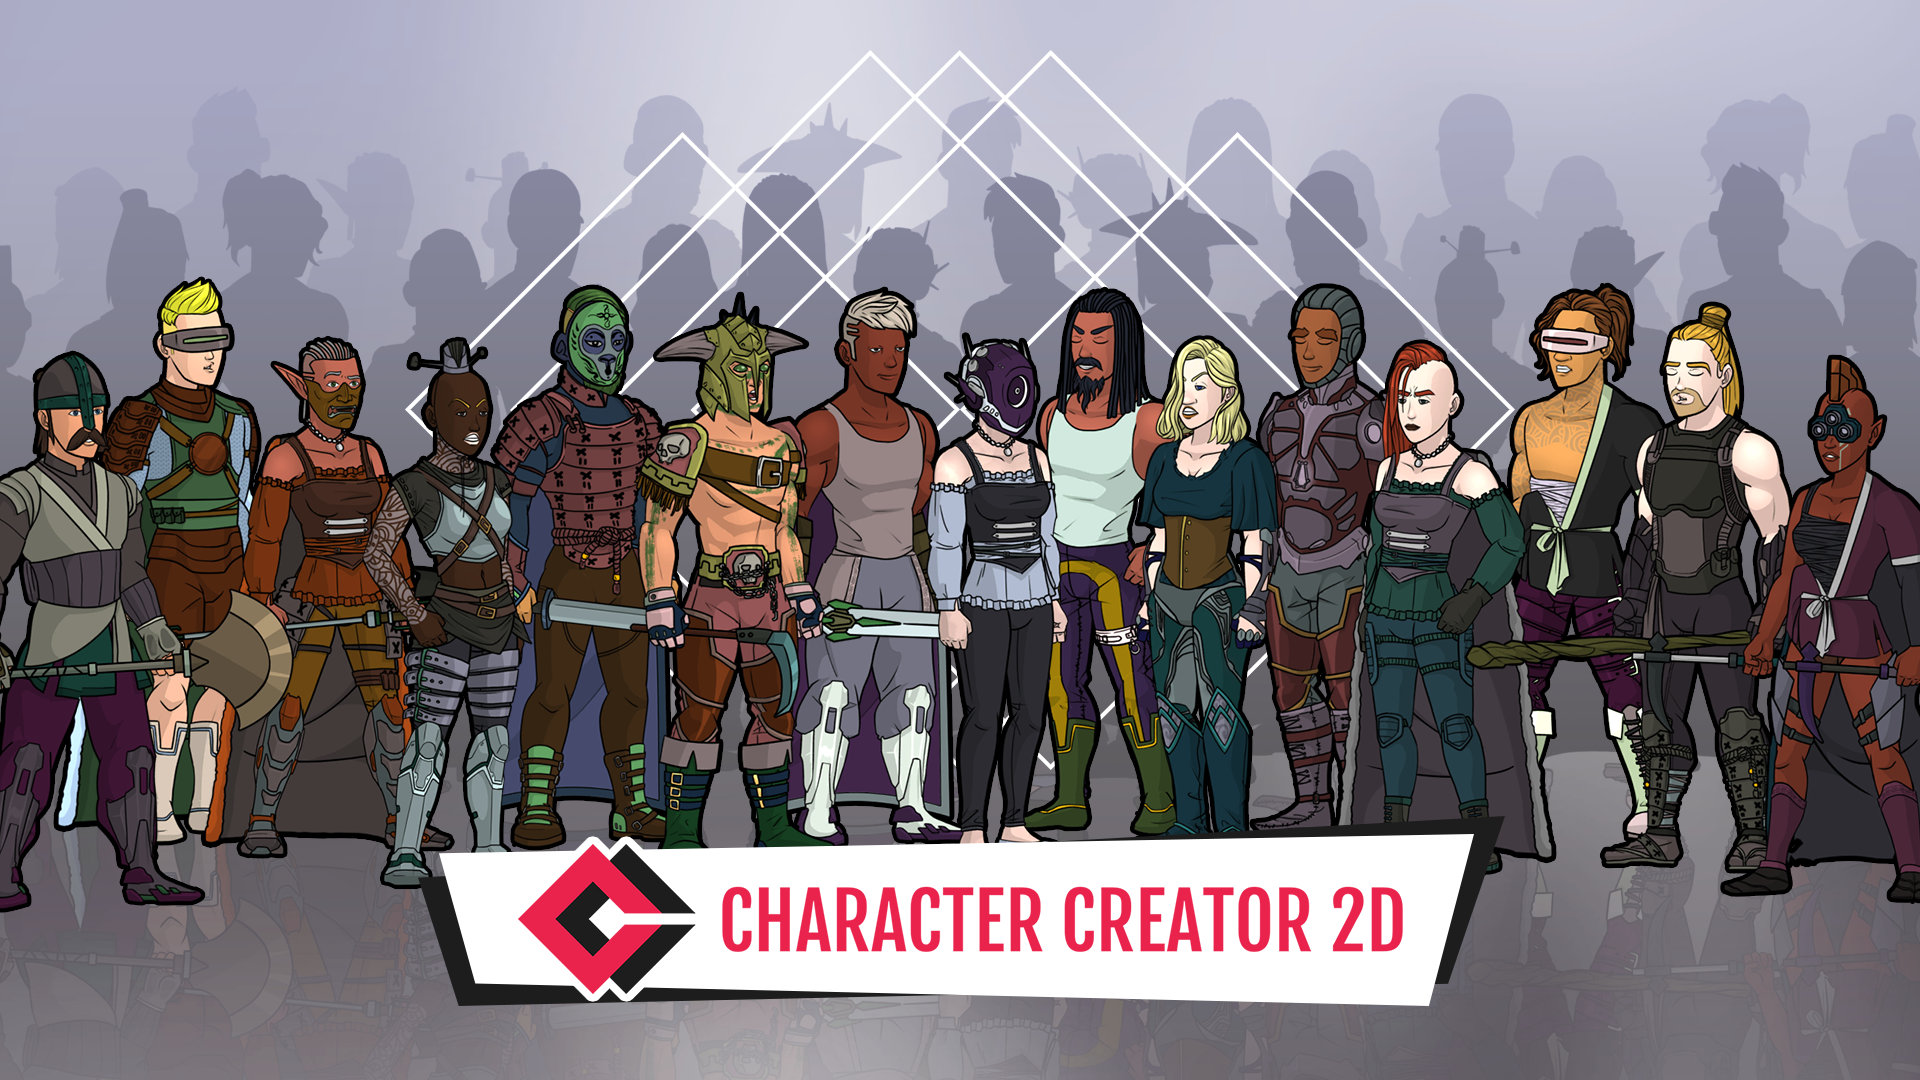 image tools to create character